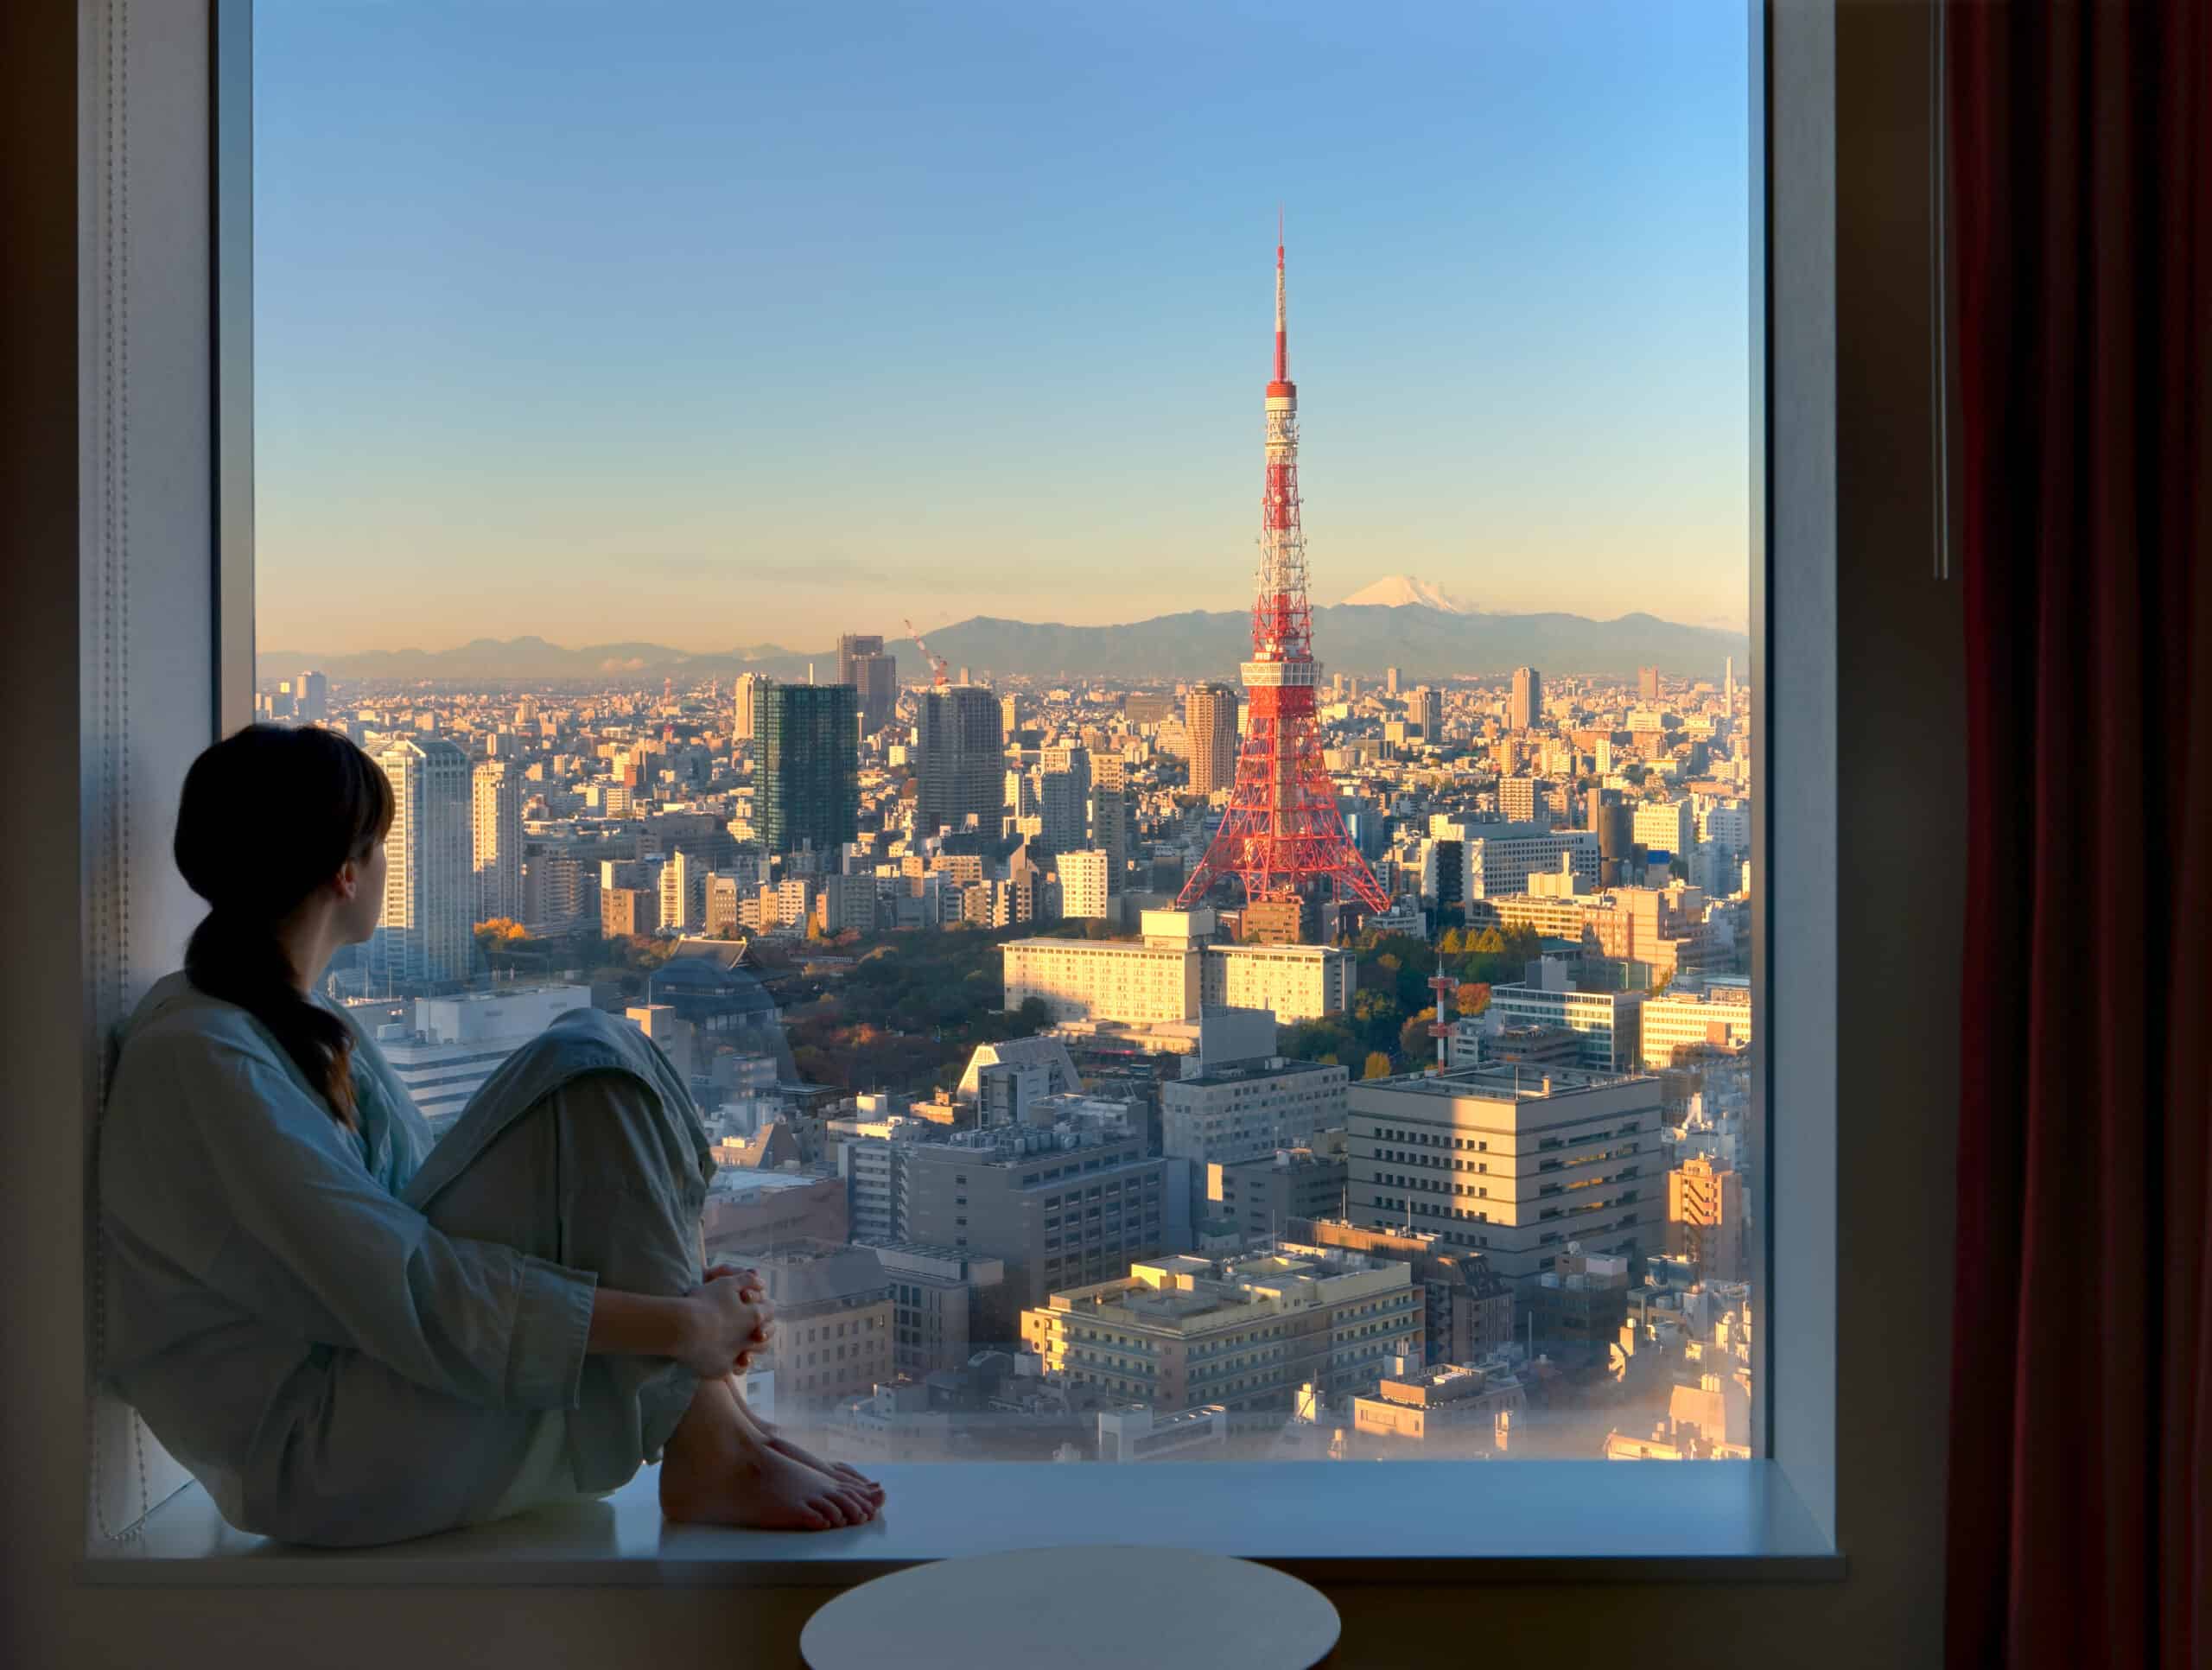 DREAMING OF JAPAN? LET ANA WAKE YOU UP